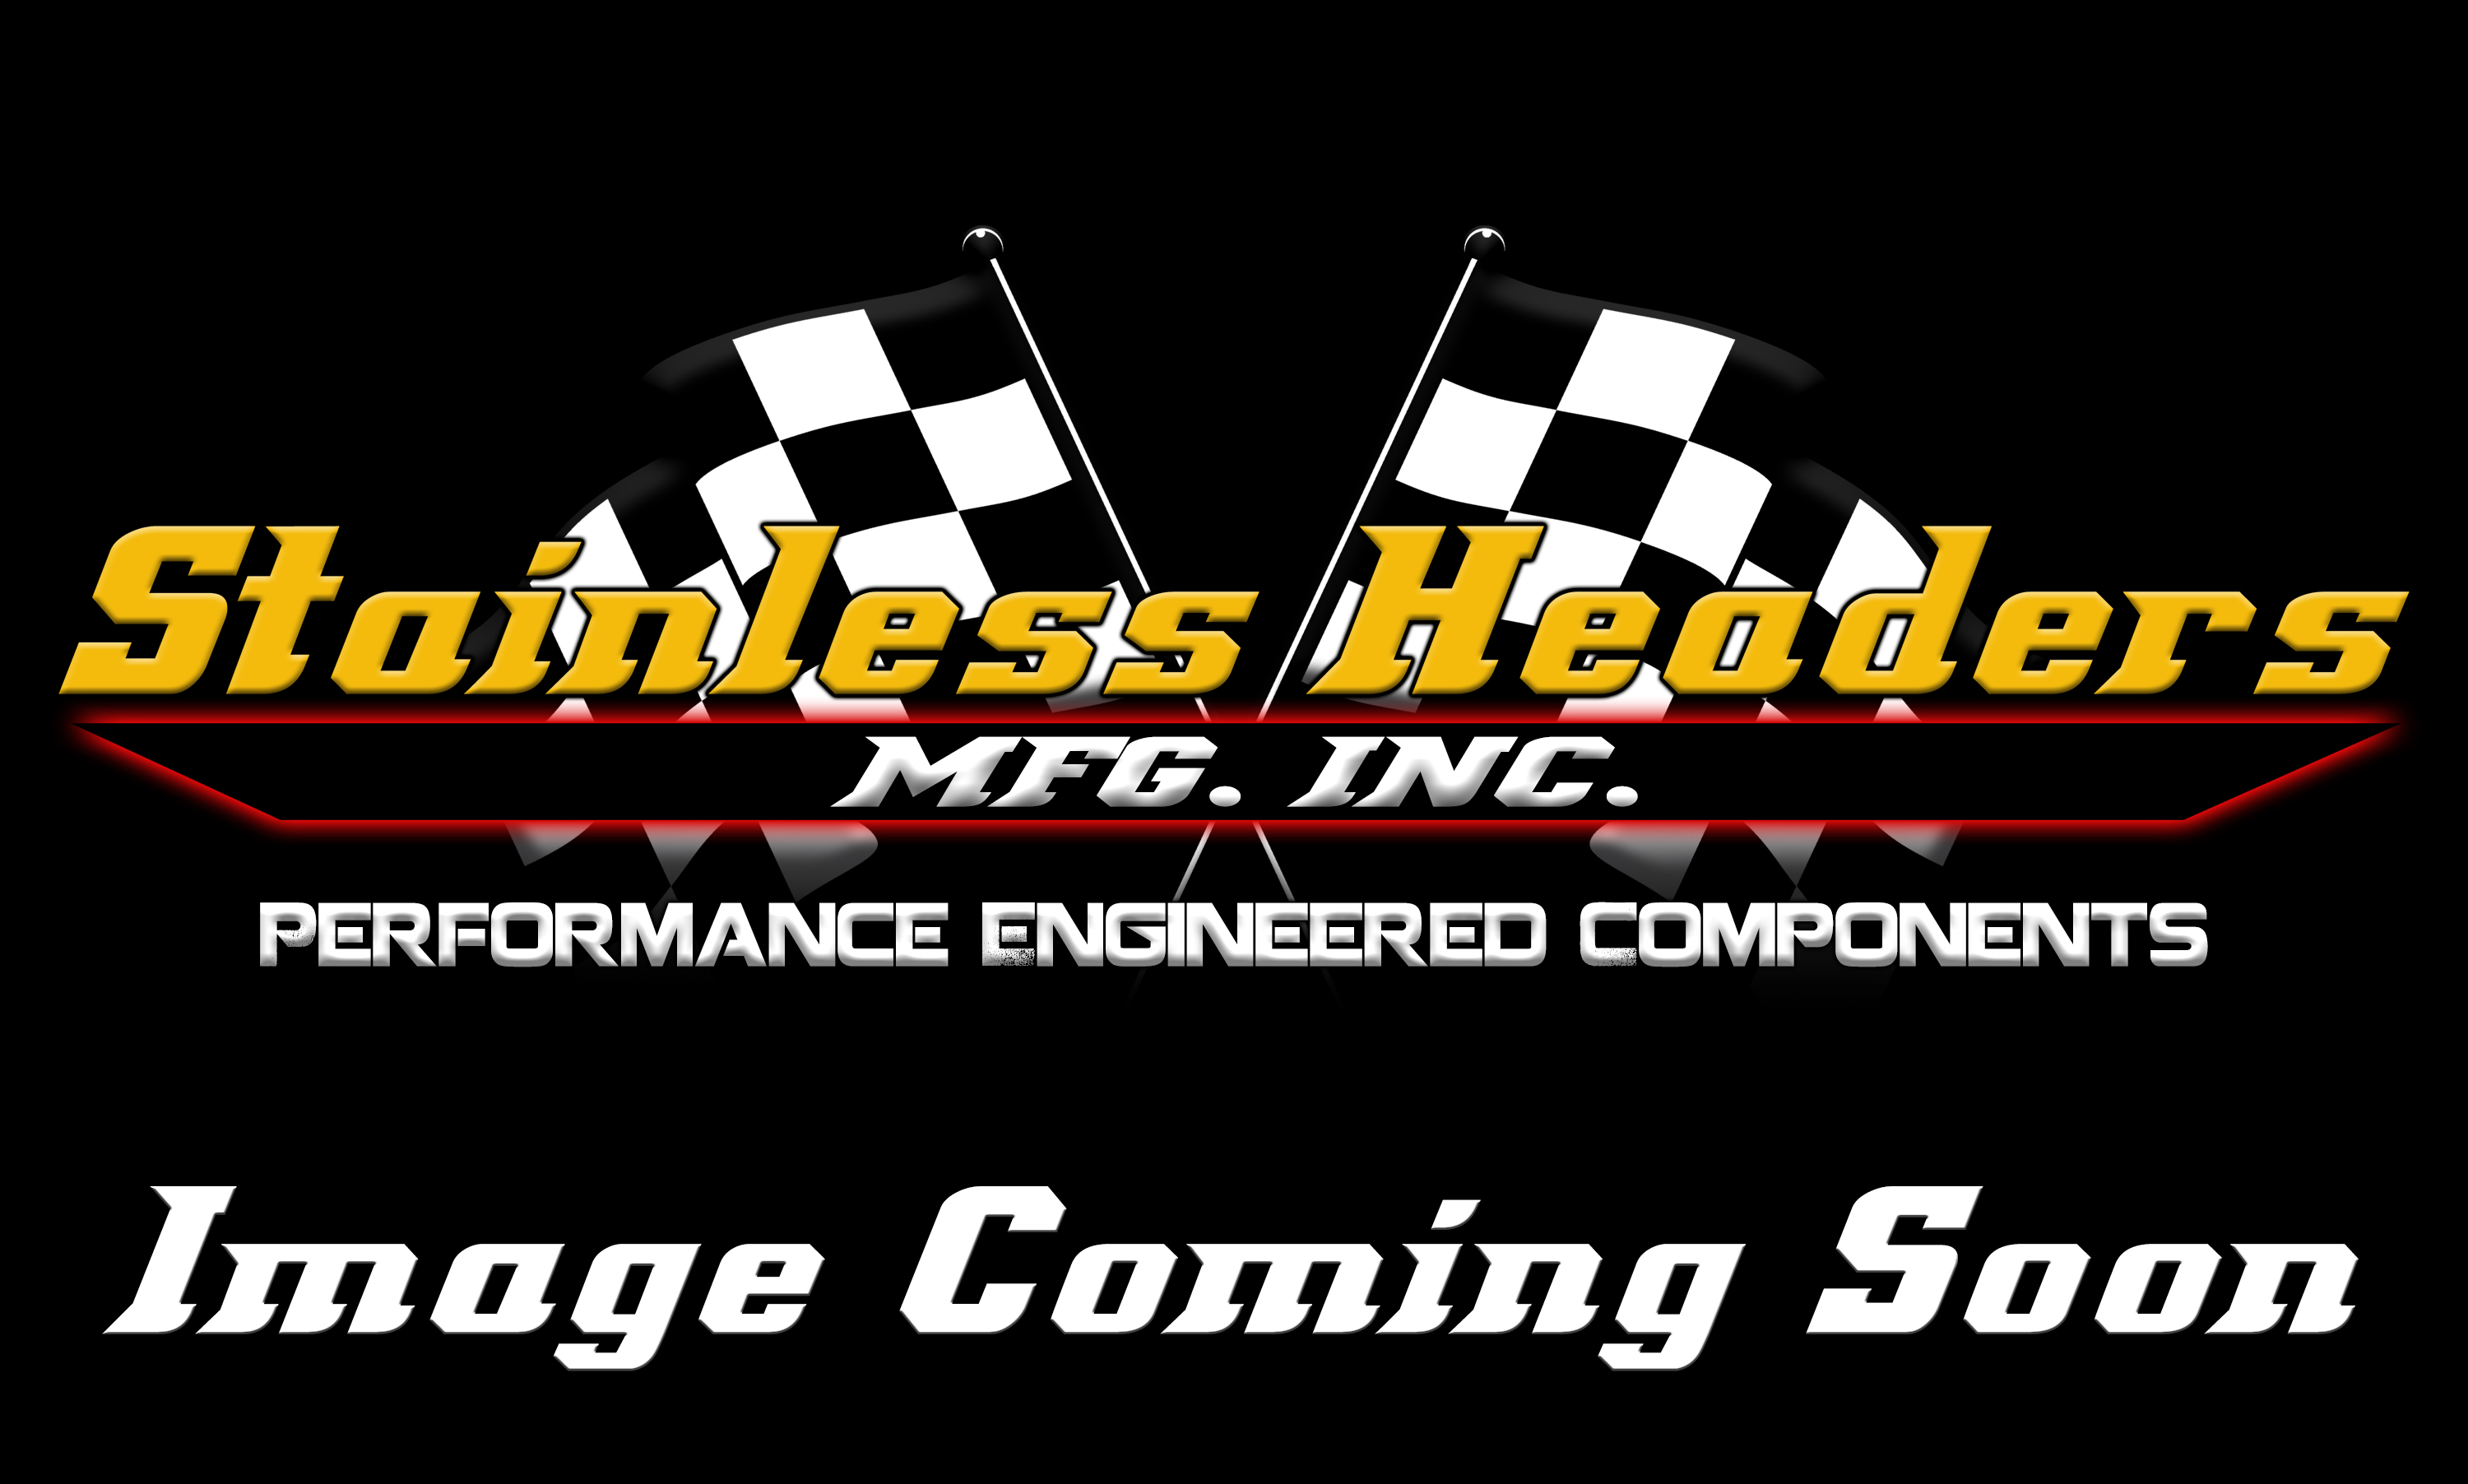 Stainless Headers - 1 7/8" Primary 5 into 1 Performance Merge Collector-16ga 304ss